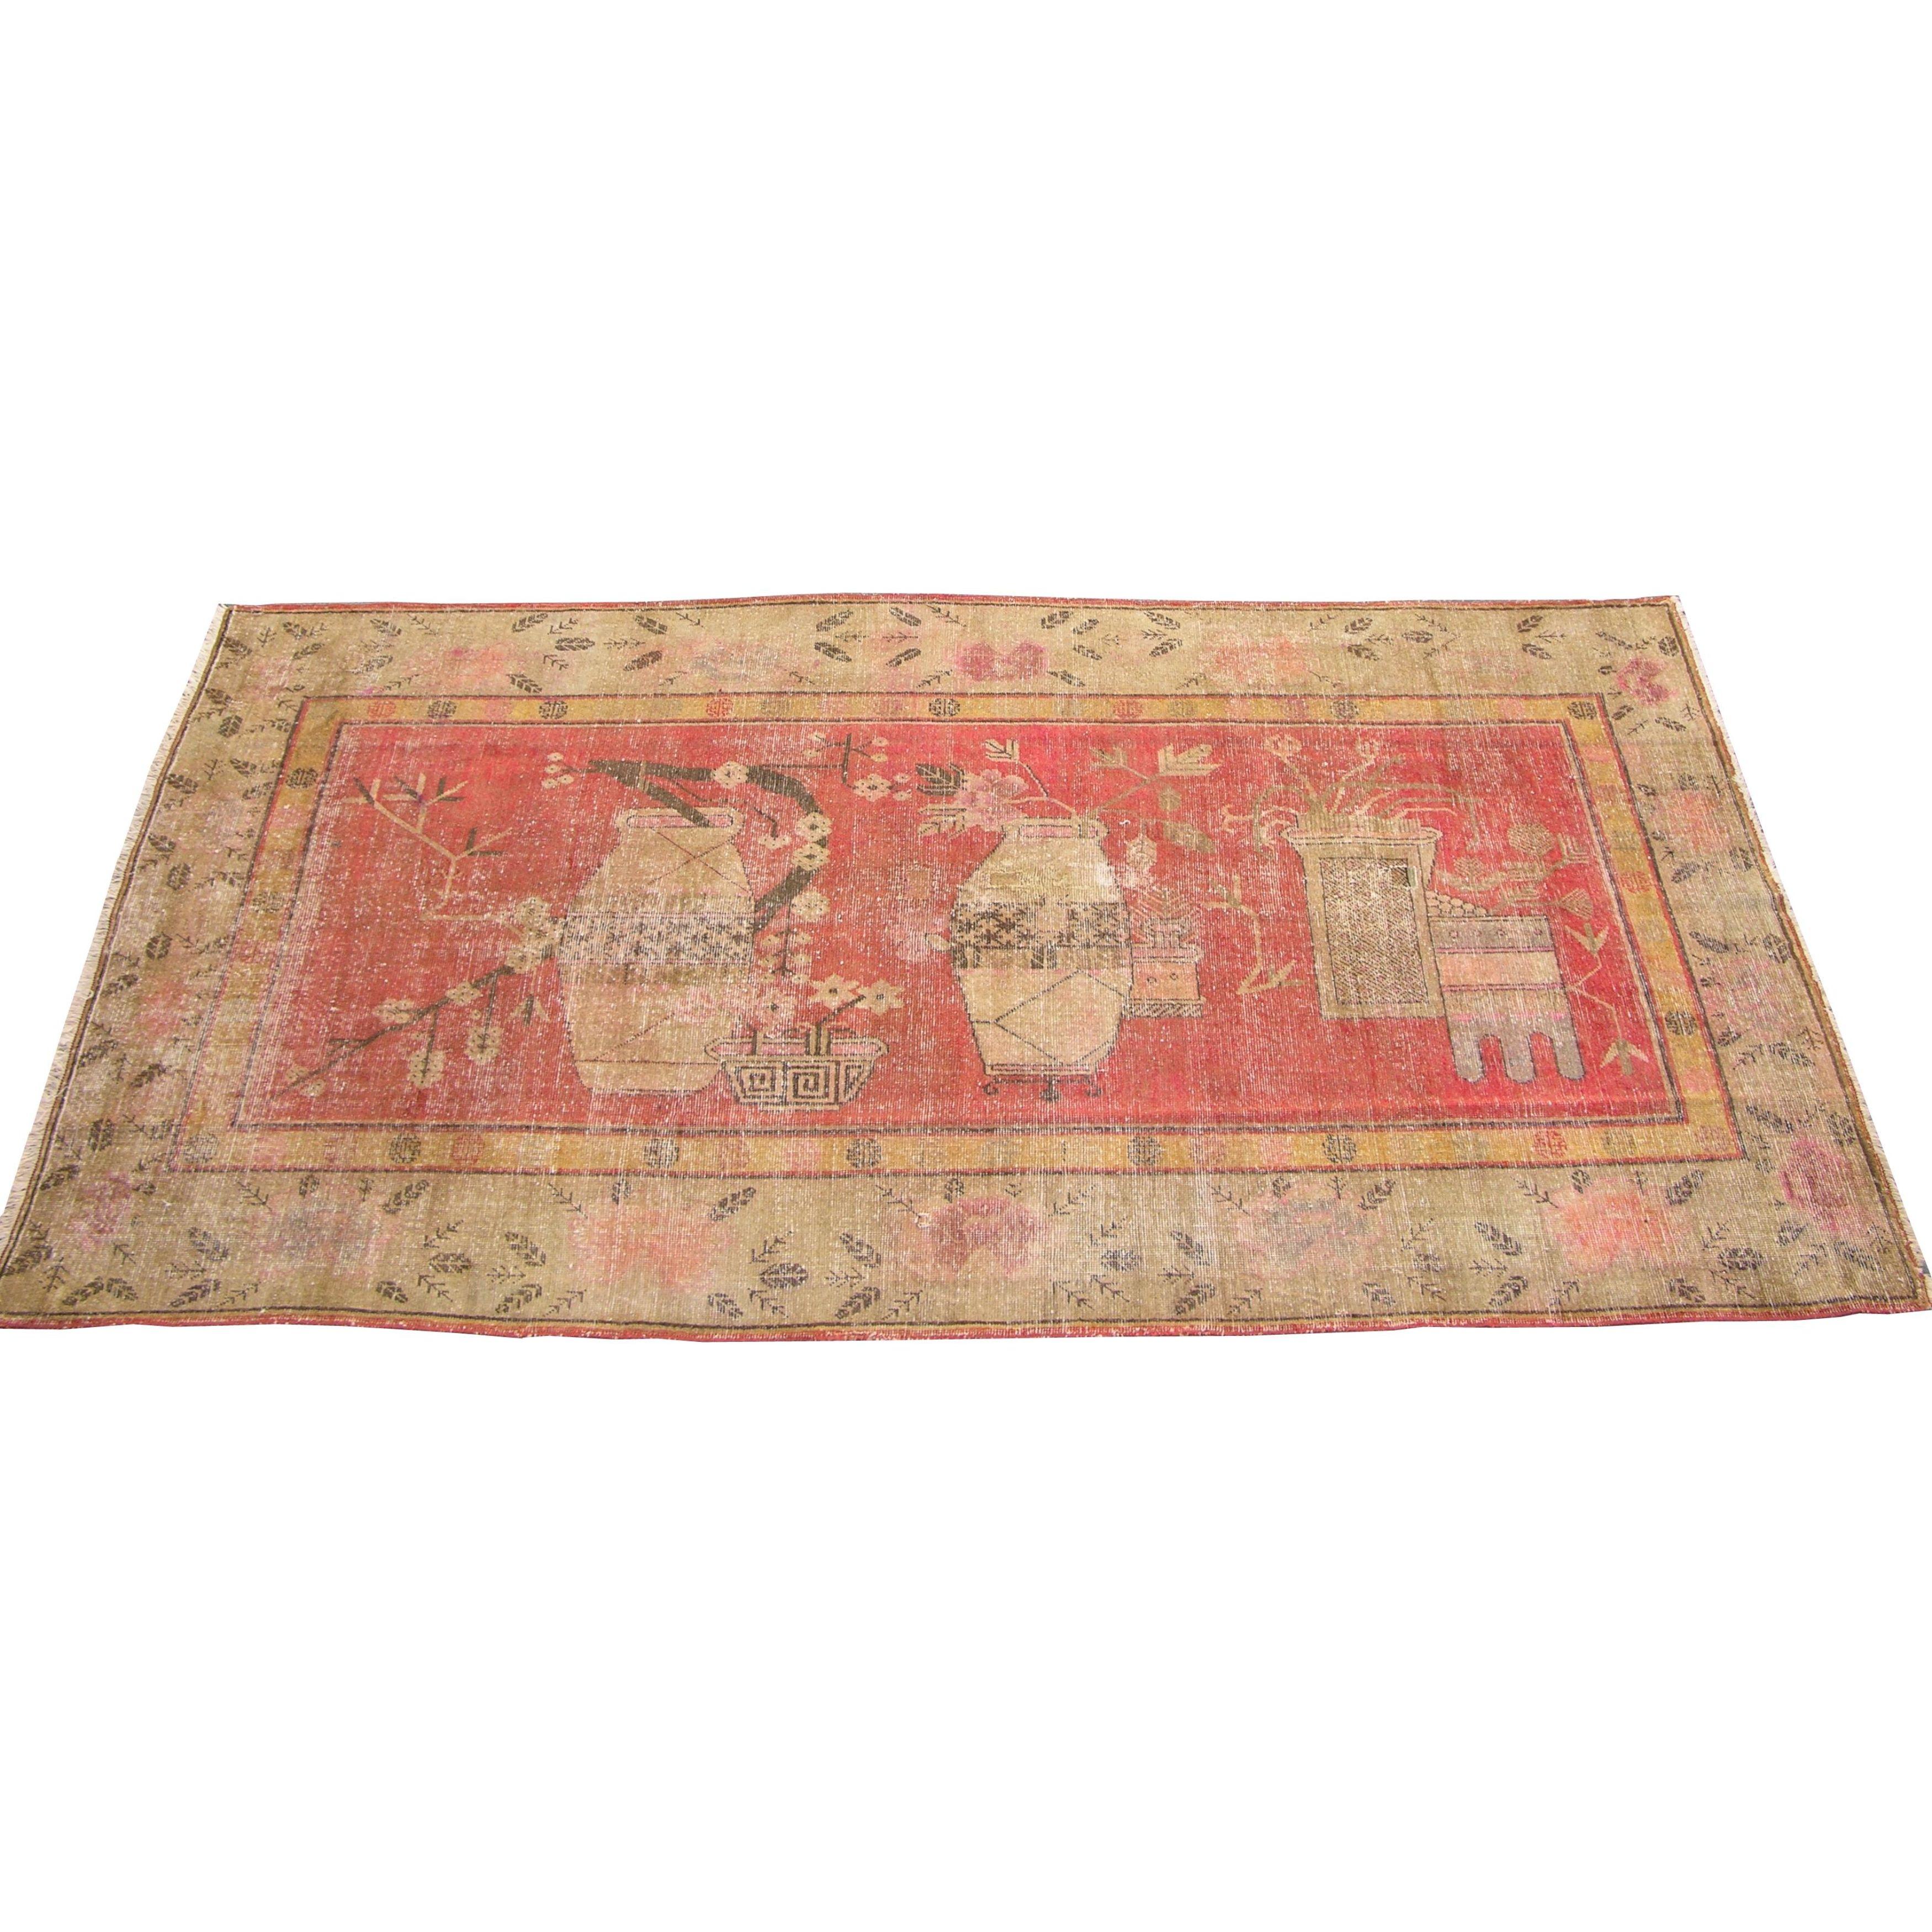 Late 19th Century Central Asian Samarkand Rug In Good Condition For Sale In Los Angeles, US